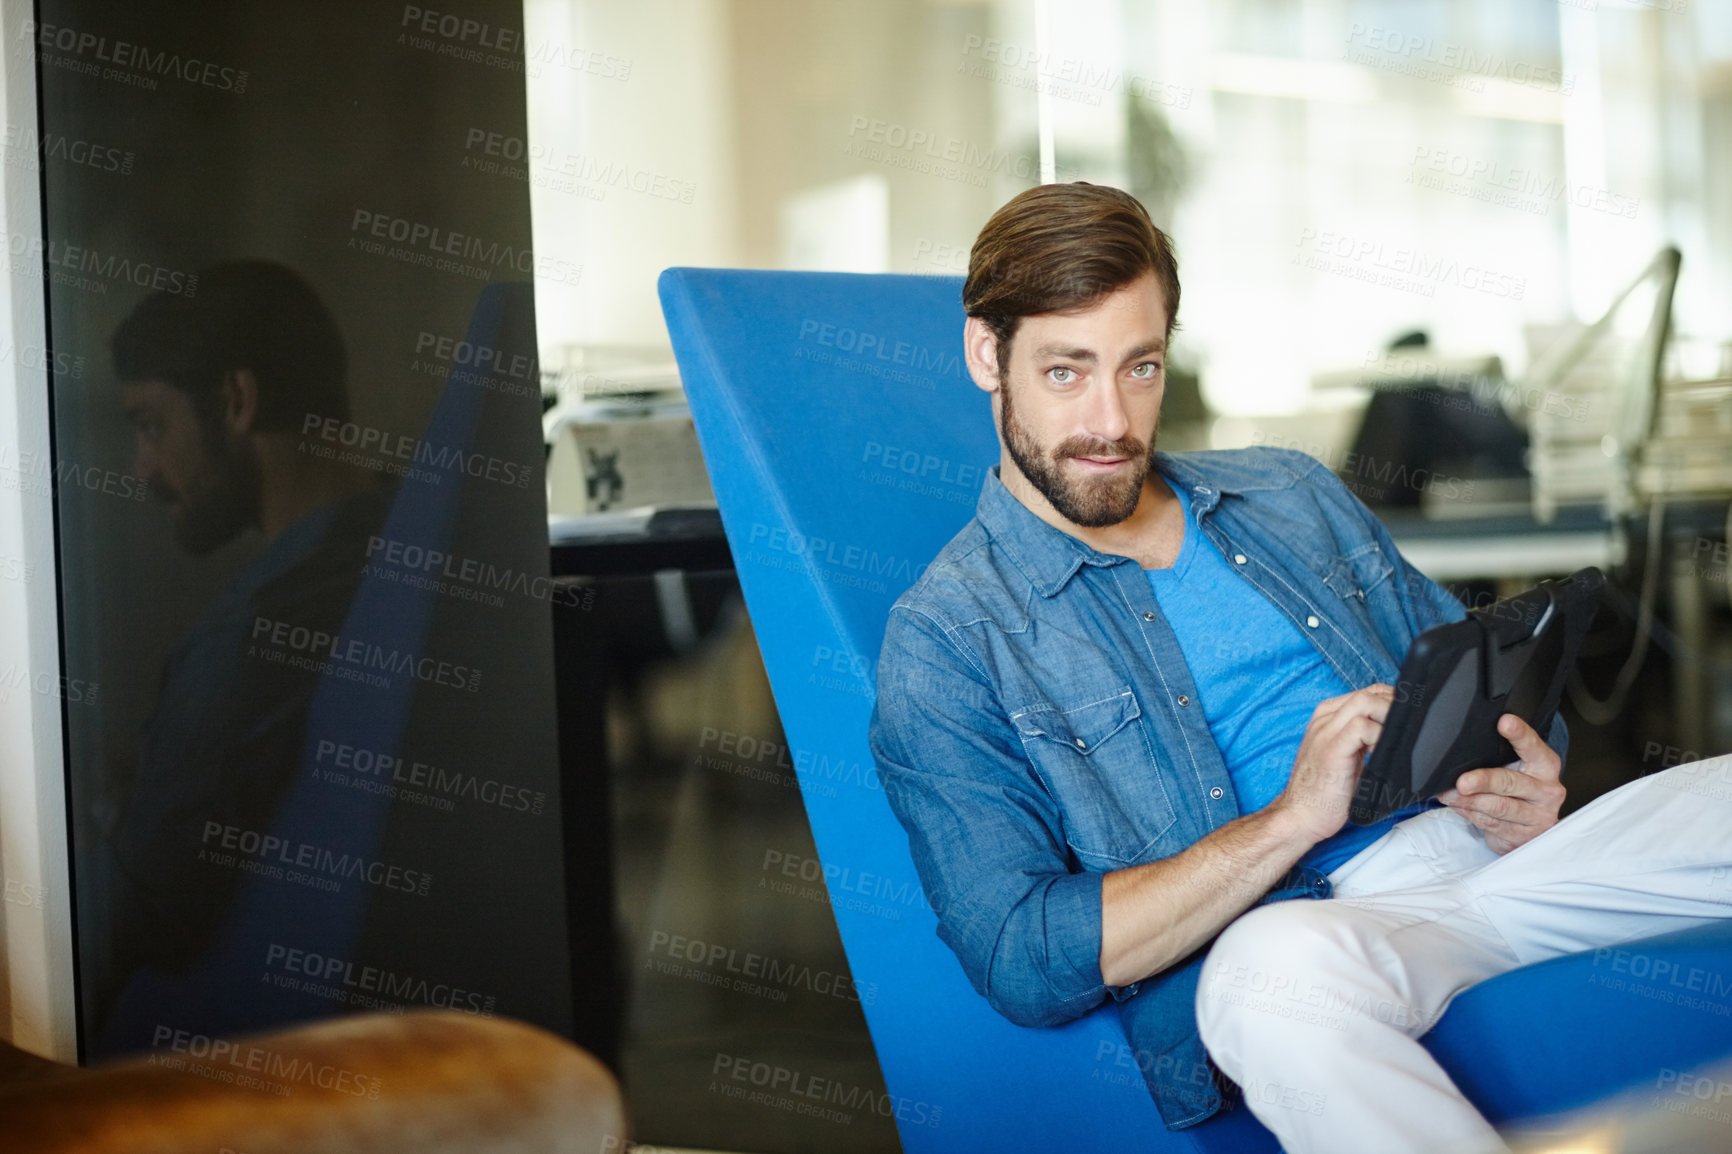 Buy stock photo Portrait of a young businessman using a digital tablet while sitting in an office